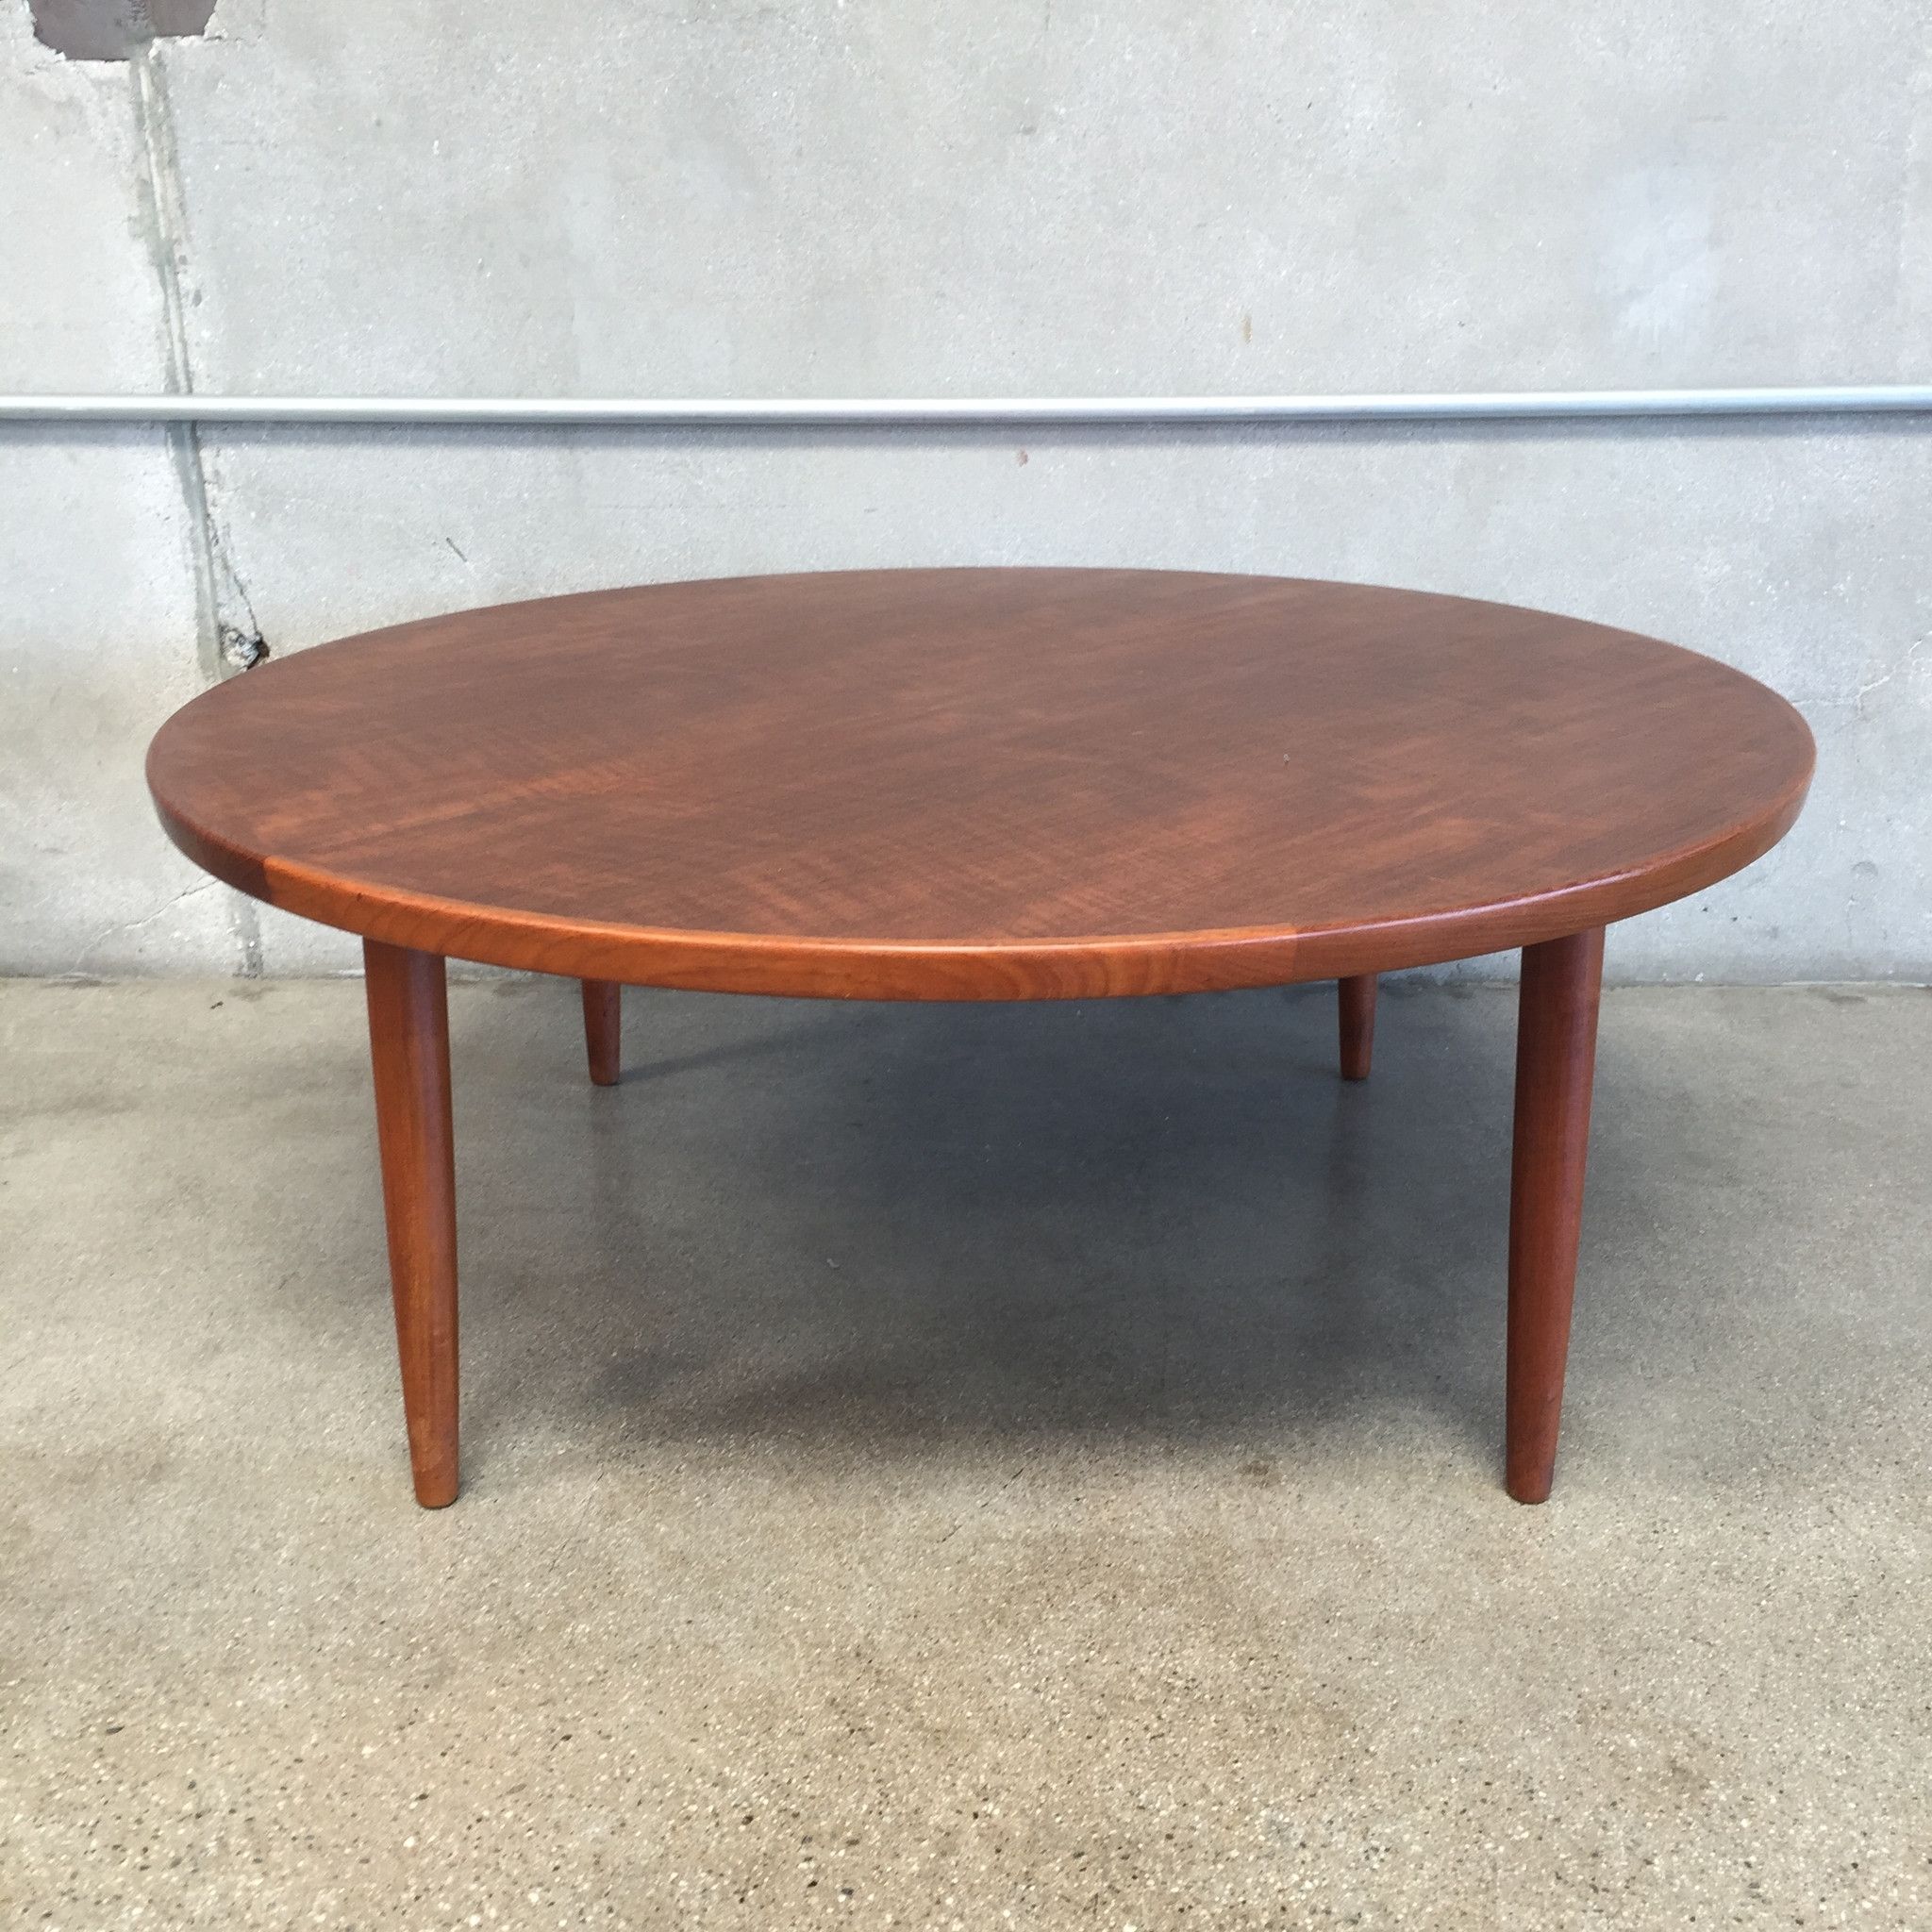 Photo Of Round Teak Coffee Table With Teak Coffee Table Set Simple For Current Round Teak Coffee Tables (View 1 of 20)